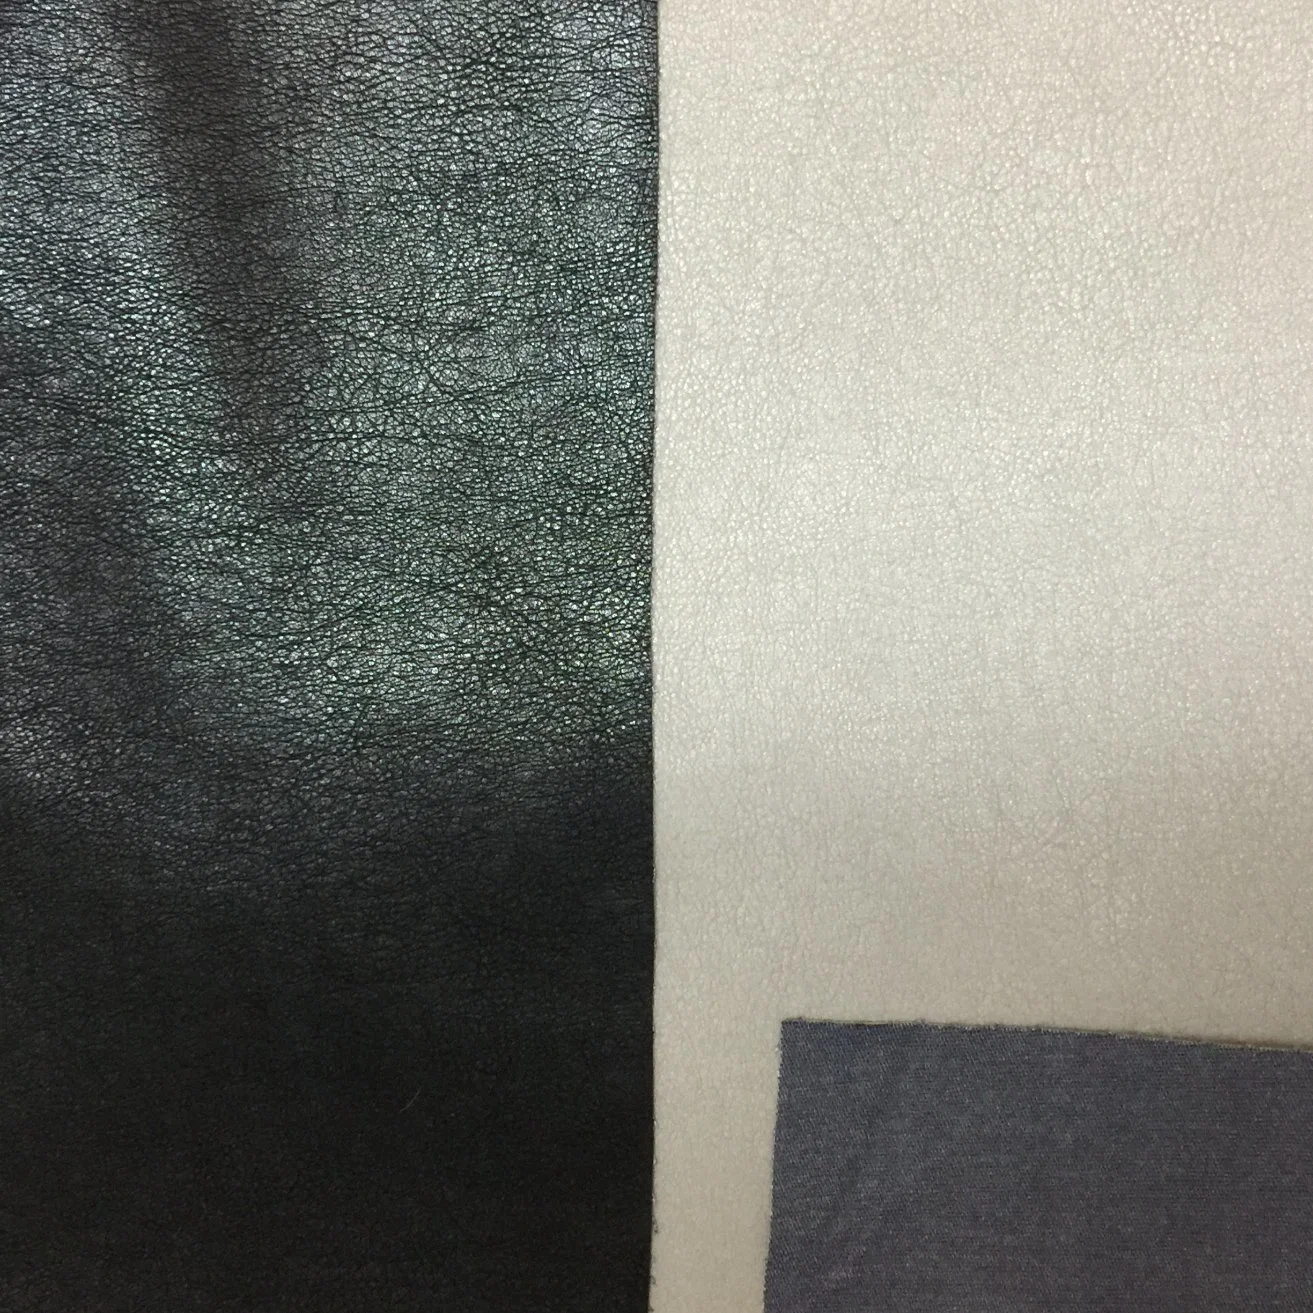 Flocking Synthetic PU Leather for Garment